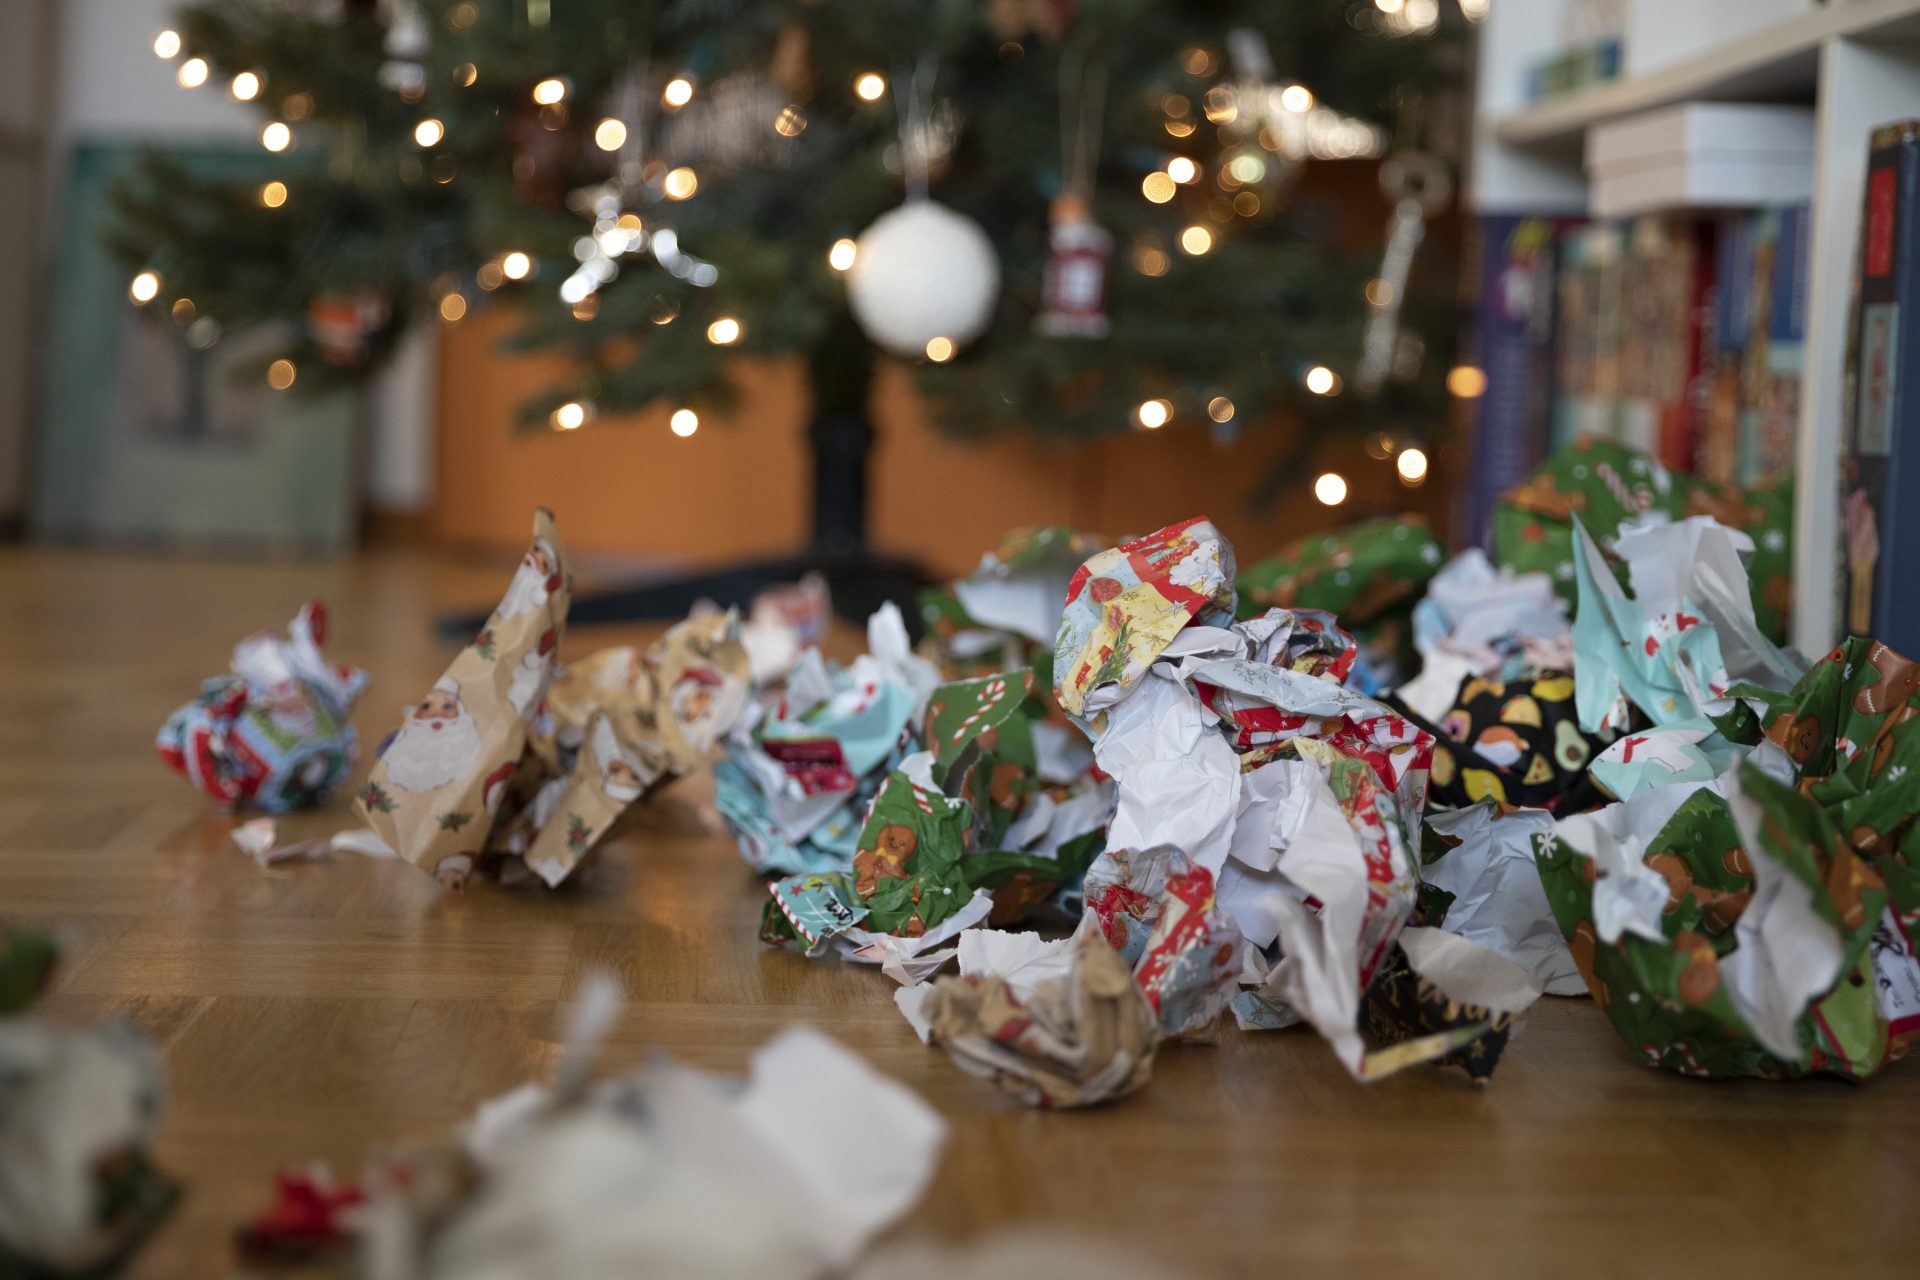 We can all do our bit to make Christmas less of an ecological disaster